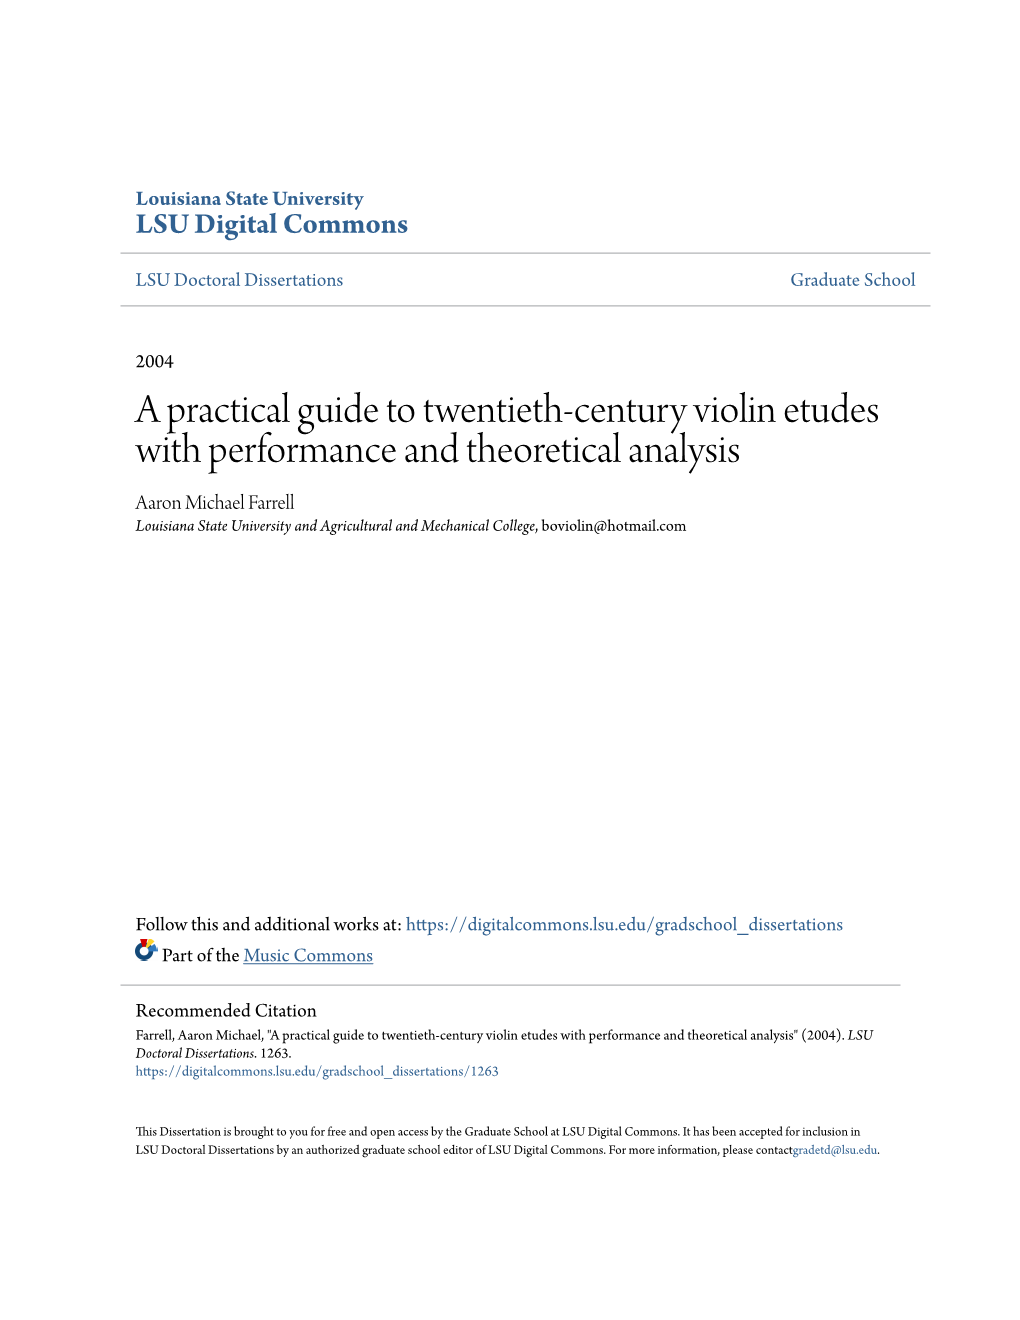 A Practical Guide to Twentieth-Century Violin Etudes with Performance and Theoretical Analysis